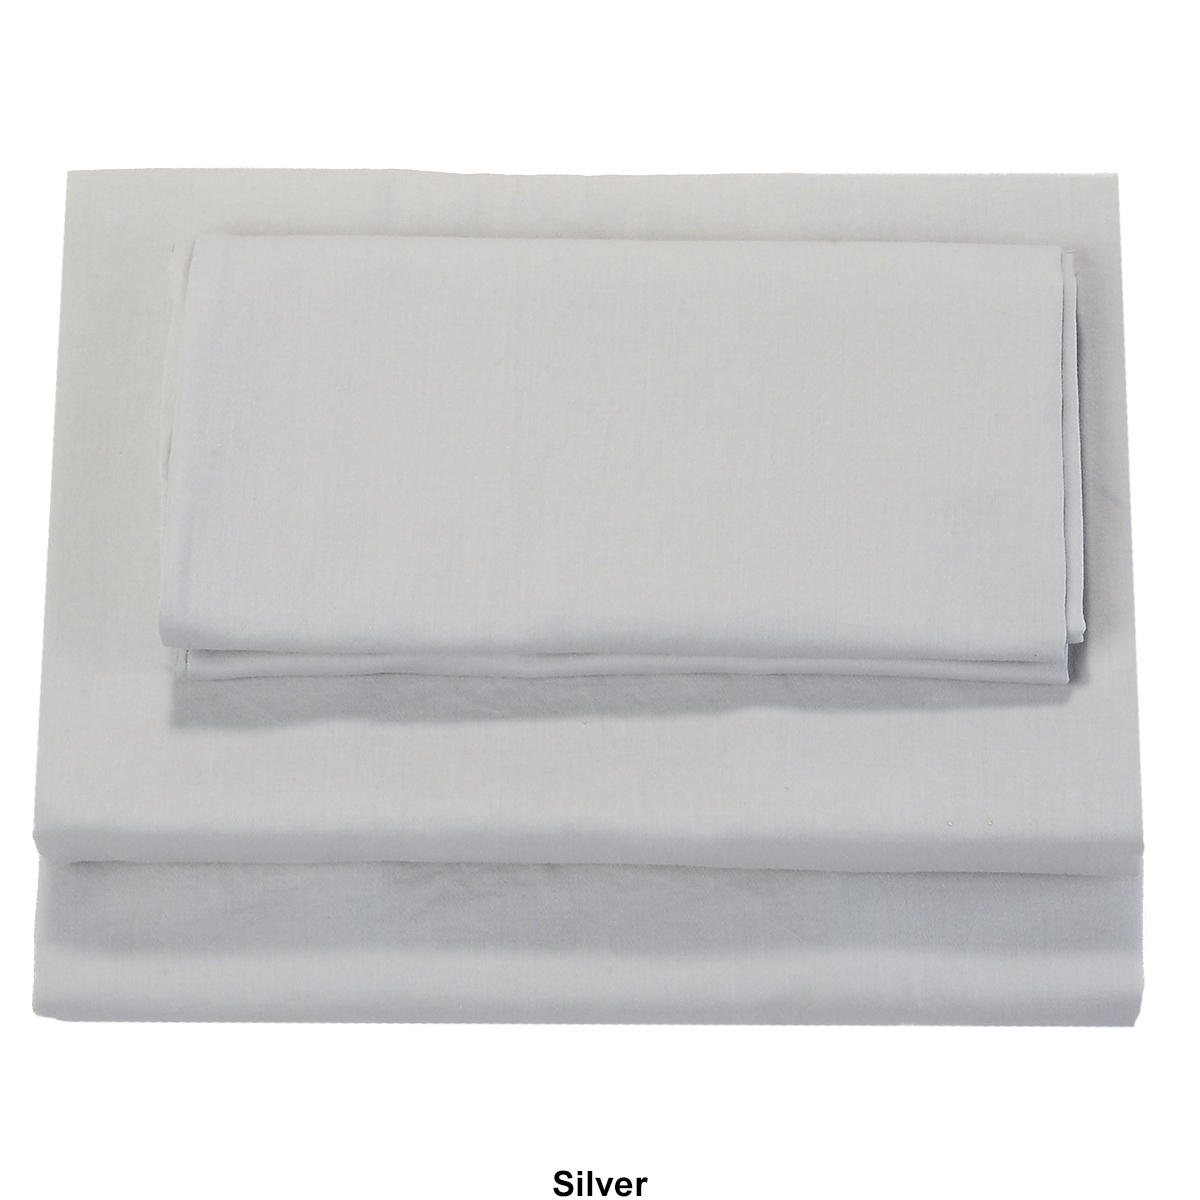 Imperial Living(tm) 4pc. Sateen 500 Thread Count  Sheet Set